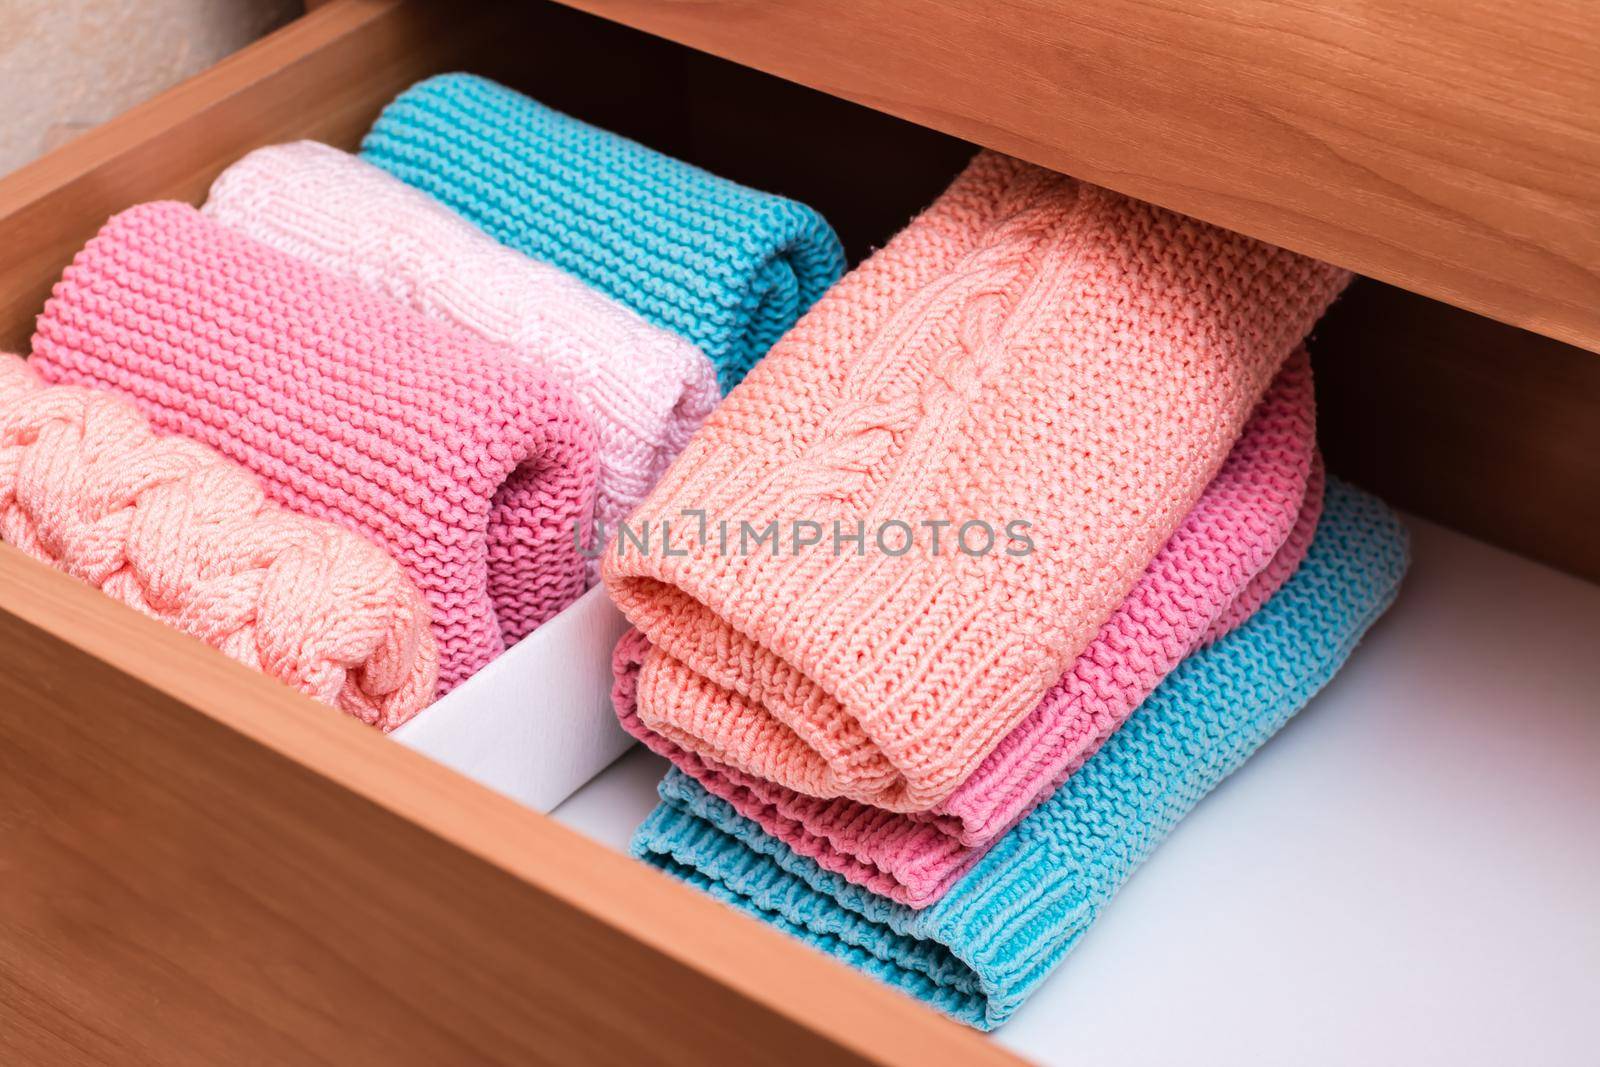 Organization and order. A stack of knitted clothes next to a box of neatly folded items in a dresser drawer by Aleruana